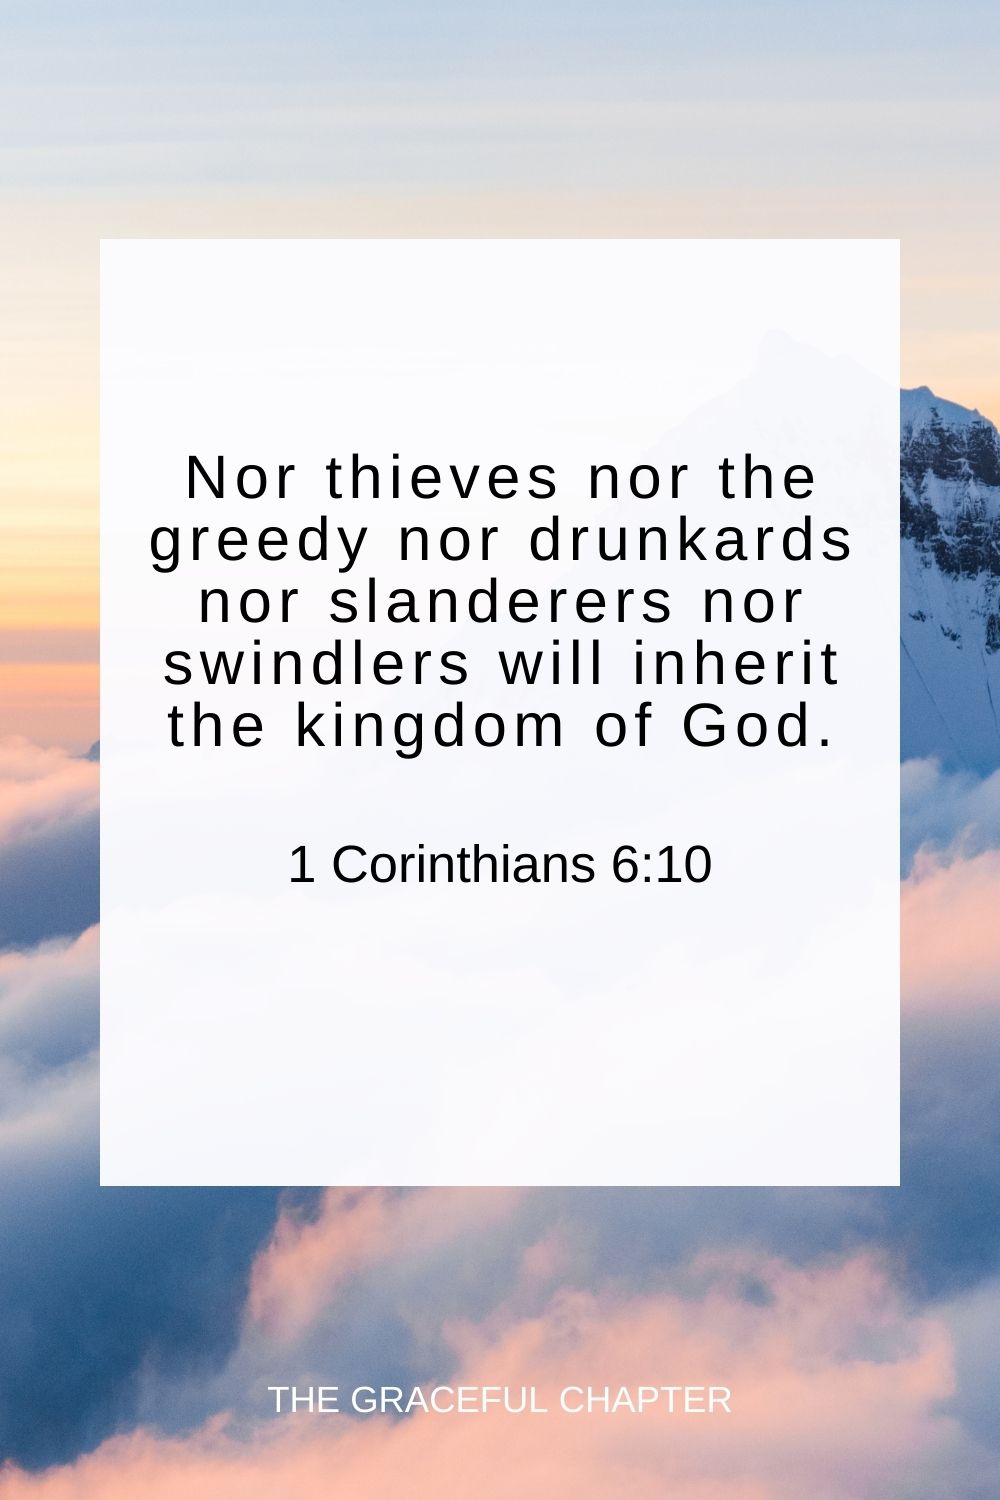 Nor thieves nor the greedy nor drunkards nor slanderers nor swindlers will inherit the kingdom of God. 1 Corinthians 6:10